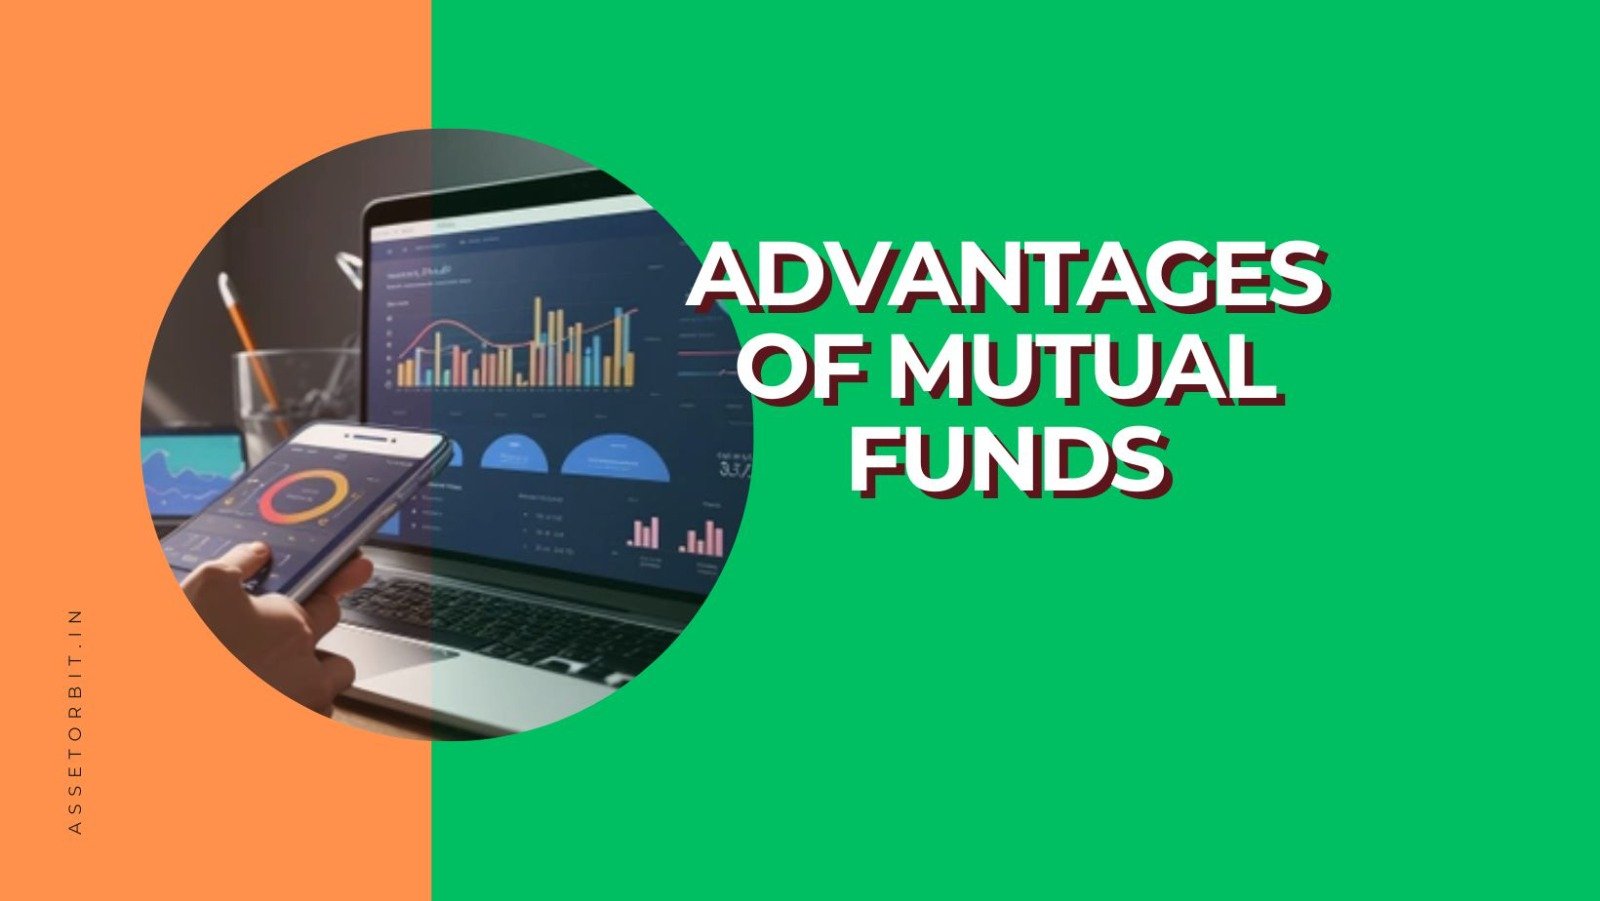 What Are the Advantages of Mutual Funds?